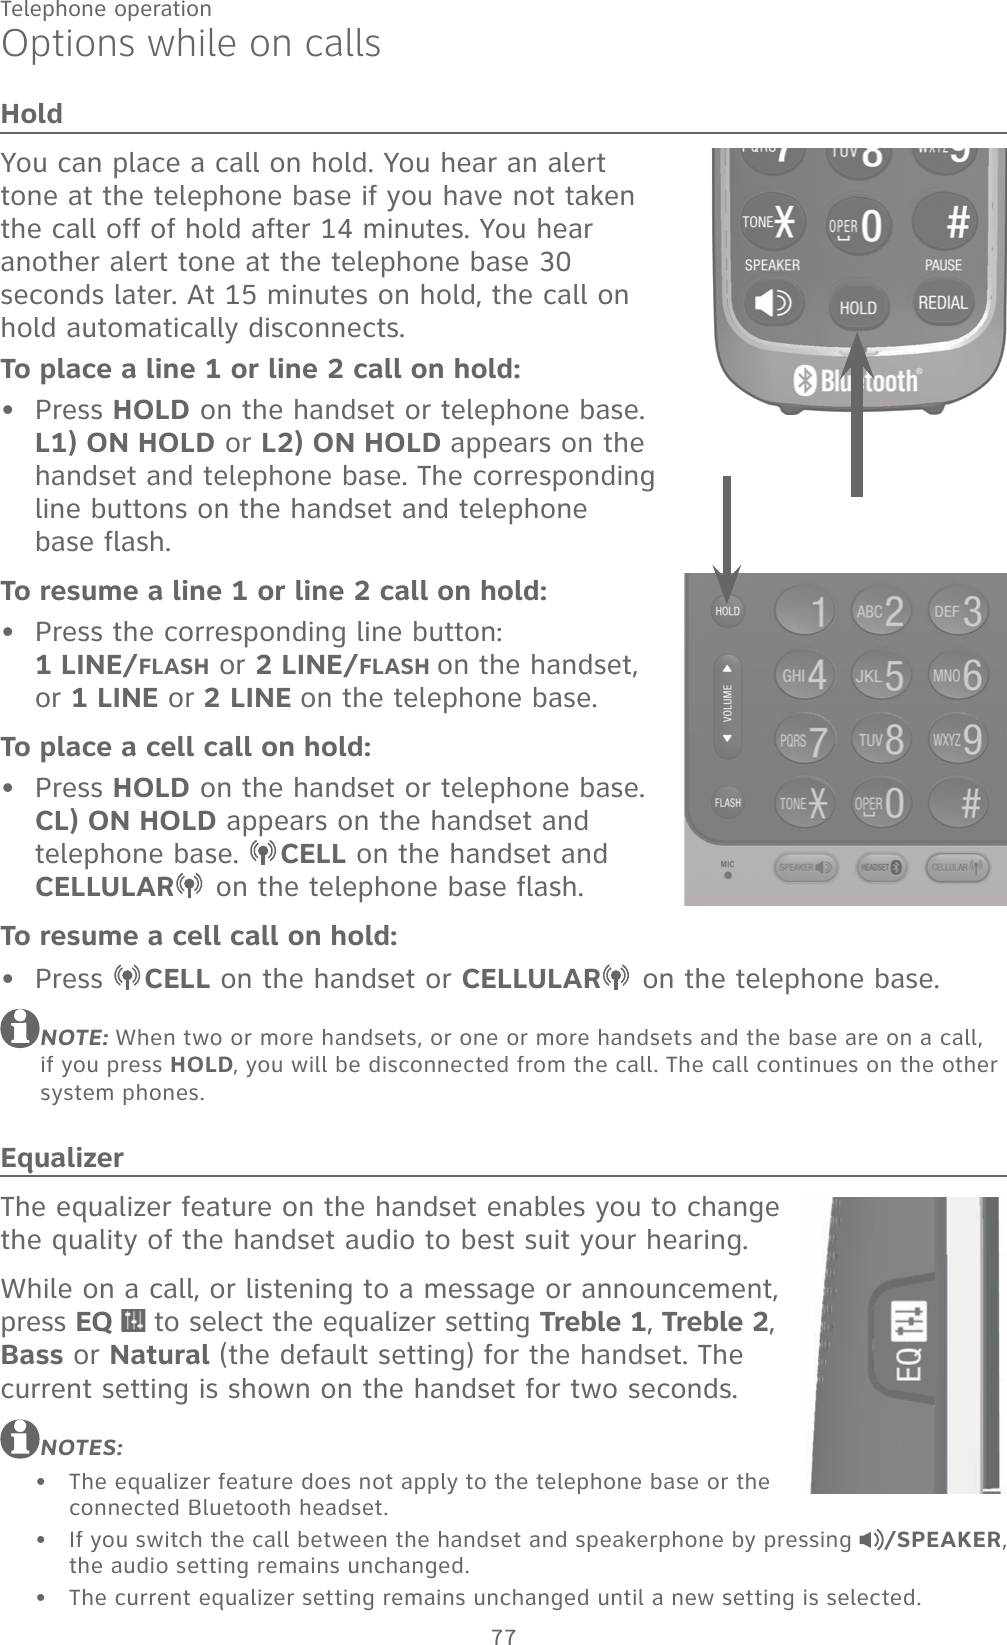 77Telephone operationOptions while on callsHoldYou can place a call on hold. You hear an alert tone at the telephone base if you have not taken the call off of hold after 14 minutes. You hear another alert tone at the telephone base 30 seconds later. At 15 minutes on hold, the call on hold automatically disconnects.To place a line 1 or line 2 call on hold:Press HOLD on the handset or telephone base.  L1) ON HOLD or L2) ON HOLD appears on the handset and telephone base. The corresponding line buttons on the handset and telephone  base flash.To resume a line 1 or line 2 call on hold:Press the corresponding line button:  1 LINE/FLASH or 2 LINE/FLASH on the handset,  or 1 LINE or 2 LINE on the telephone base.To place a cell call on hold:Press HOLD on the handset or telephone base. CL) ON HOLD appears on the handset and telephone base.  CELL on the handset and CELLULAR  on the telephone base flash.To resume a cell call on hold:Press  CELL on the handset or CELLULAR  on the telephone base.NOTE: When two or more handsets, or one or more handsets and the base are on a call, if you press HOLD, you will be disconnected from the call. The call continues on the other system phones.EqualizerThe equalizer feature on the handset enables you to change the quality of the handset audio to best suit your hearing.While on a call, or listening to a message or announcement, press EQ   to select the equalizer setting Treble 1, Treble 2,  Bass or Natural (the default setting) for the handset. The current setting is shown on the handset for two seconds.NOTES:The equalizer feature does not apply to the telephone base or the connected Bluetooth headset.If you switch the call between the handset and speakerphone by pressing  /SPEAKER, the audio setting remains unchanged.The current equalizer setting remains unchanged until a new setting is selected.•••••••